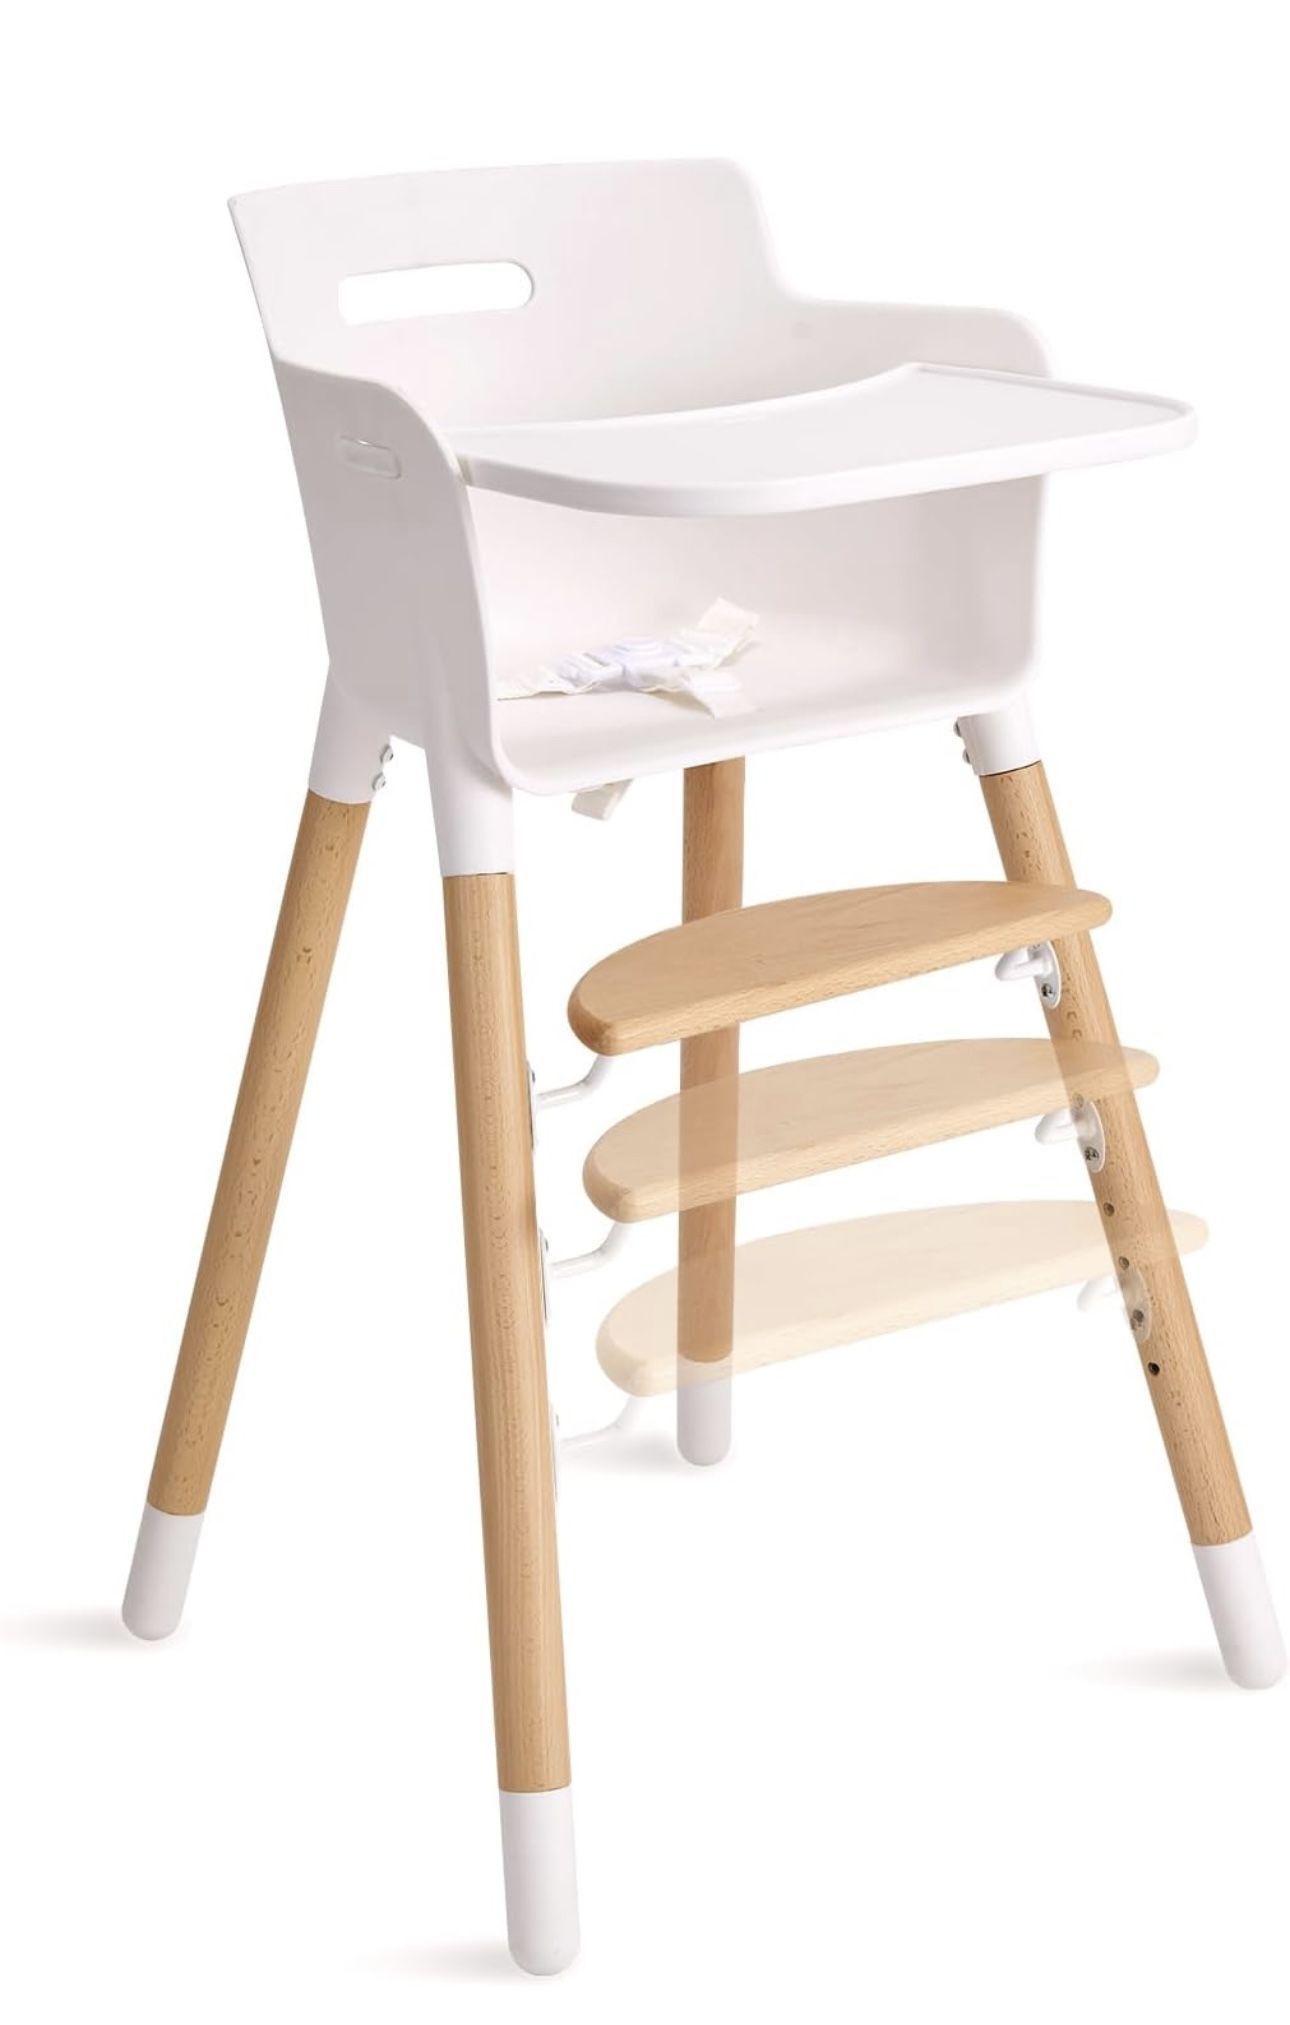 Baby High Chair, Wooden High Chairs For Babies & Toddlers, Highchair With Adjustable Footrest, Solid Beech Wood, Removable Tray, Ergonomic Seat Back, 